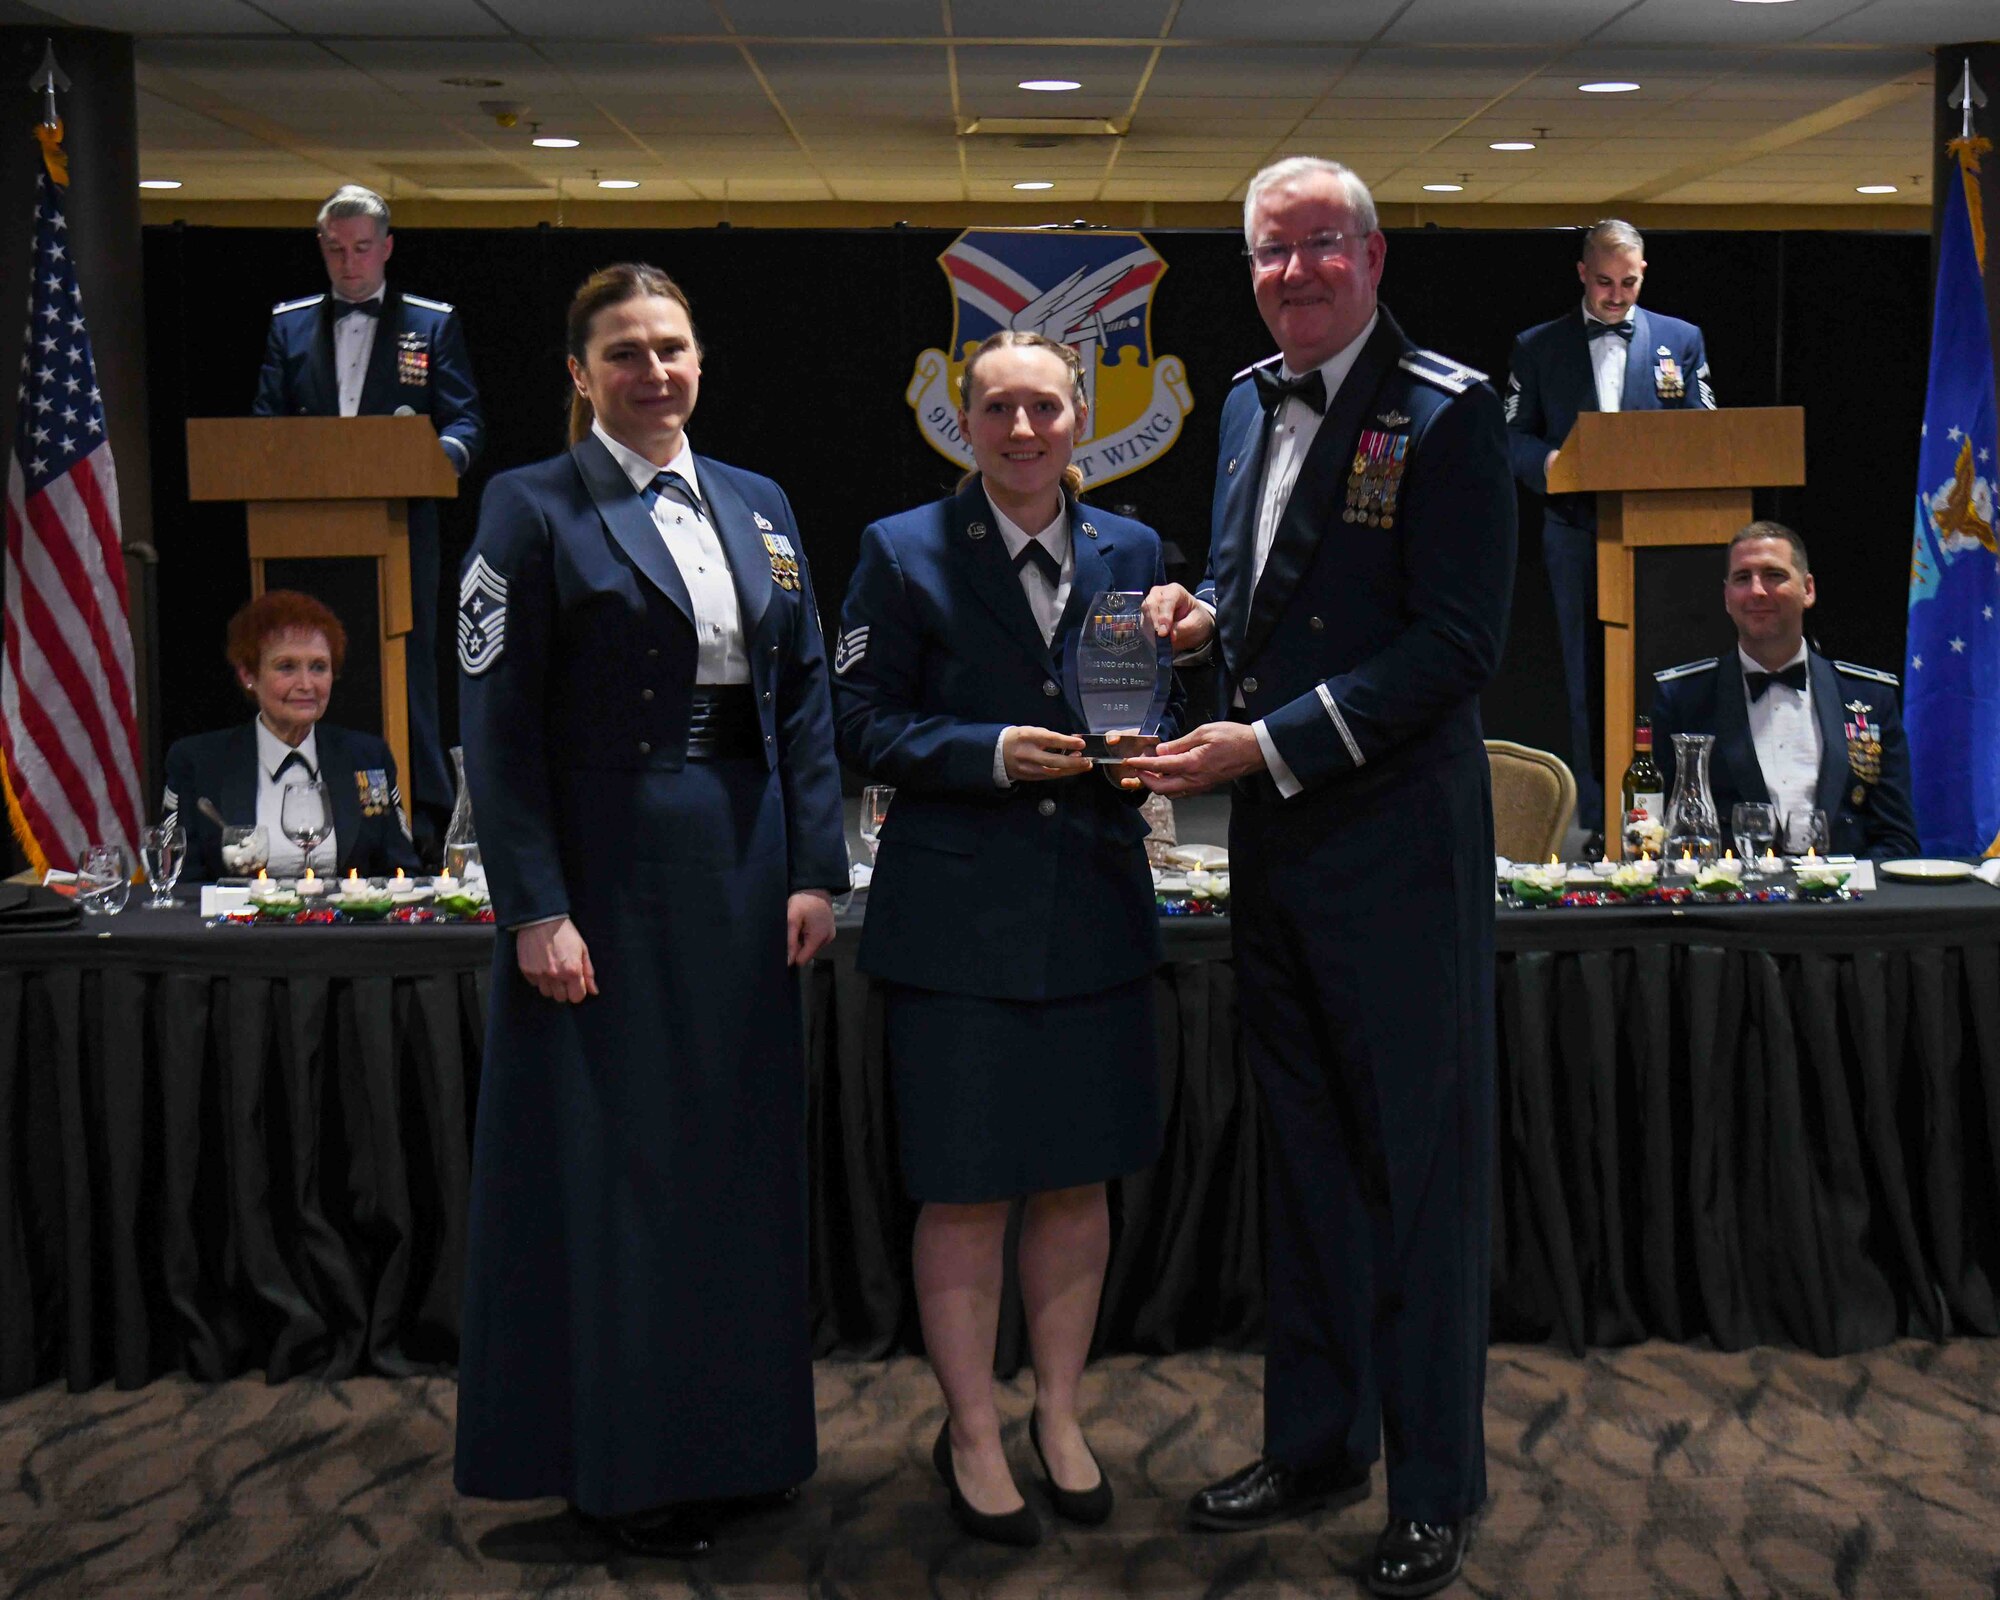 Staff Sgt. Rachel Berger (center), a special handling representative with the 76th Aerial Port Squadron, receives the Non-Commissioned Officer of the Year award from 910th Airlift Wing Commander Col. Jeff Van Dootingh (right) and 910th AW Command Chief Master Sgt. Jennifer McKendree (left), during the unit’s annual awards banquet, March 4, 2023, at Youngstown Air Reserve Station, Ohio.